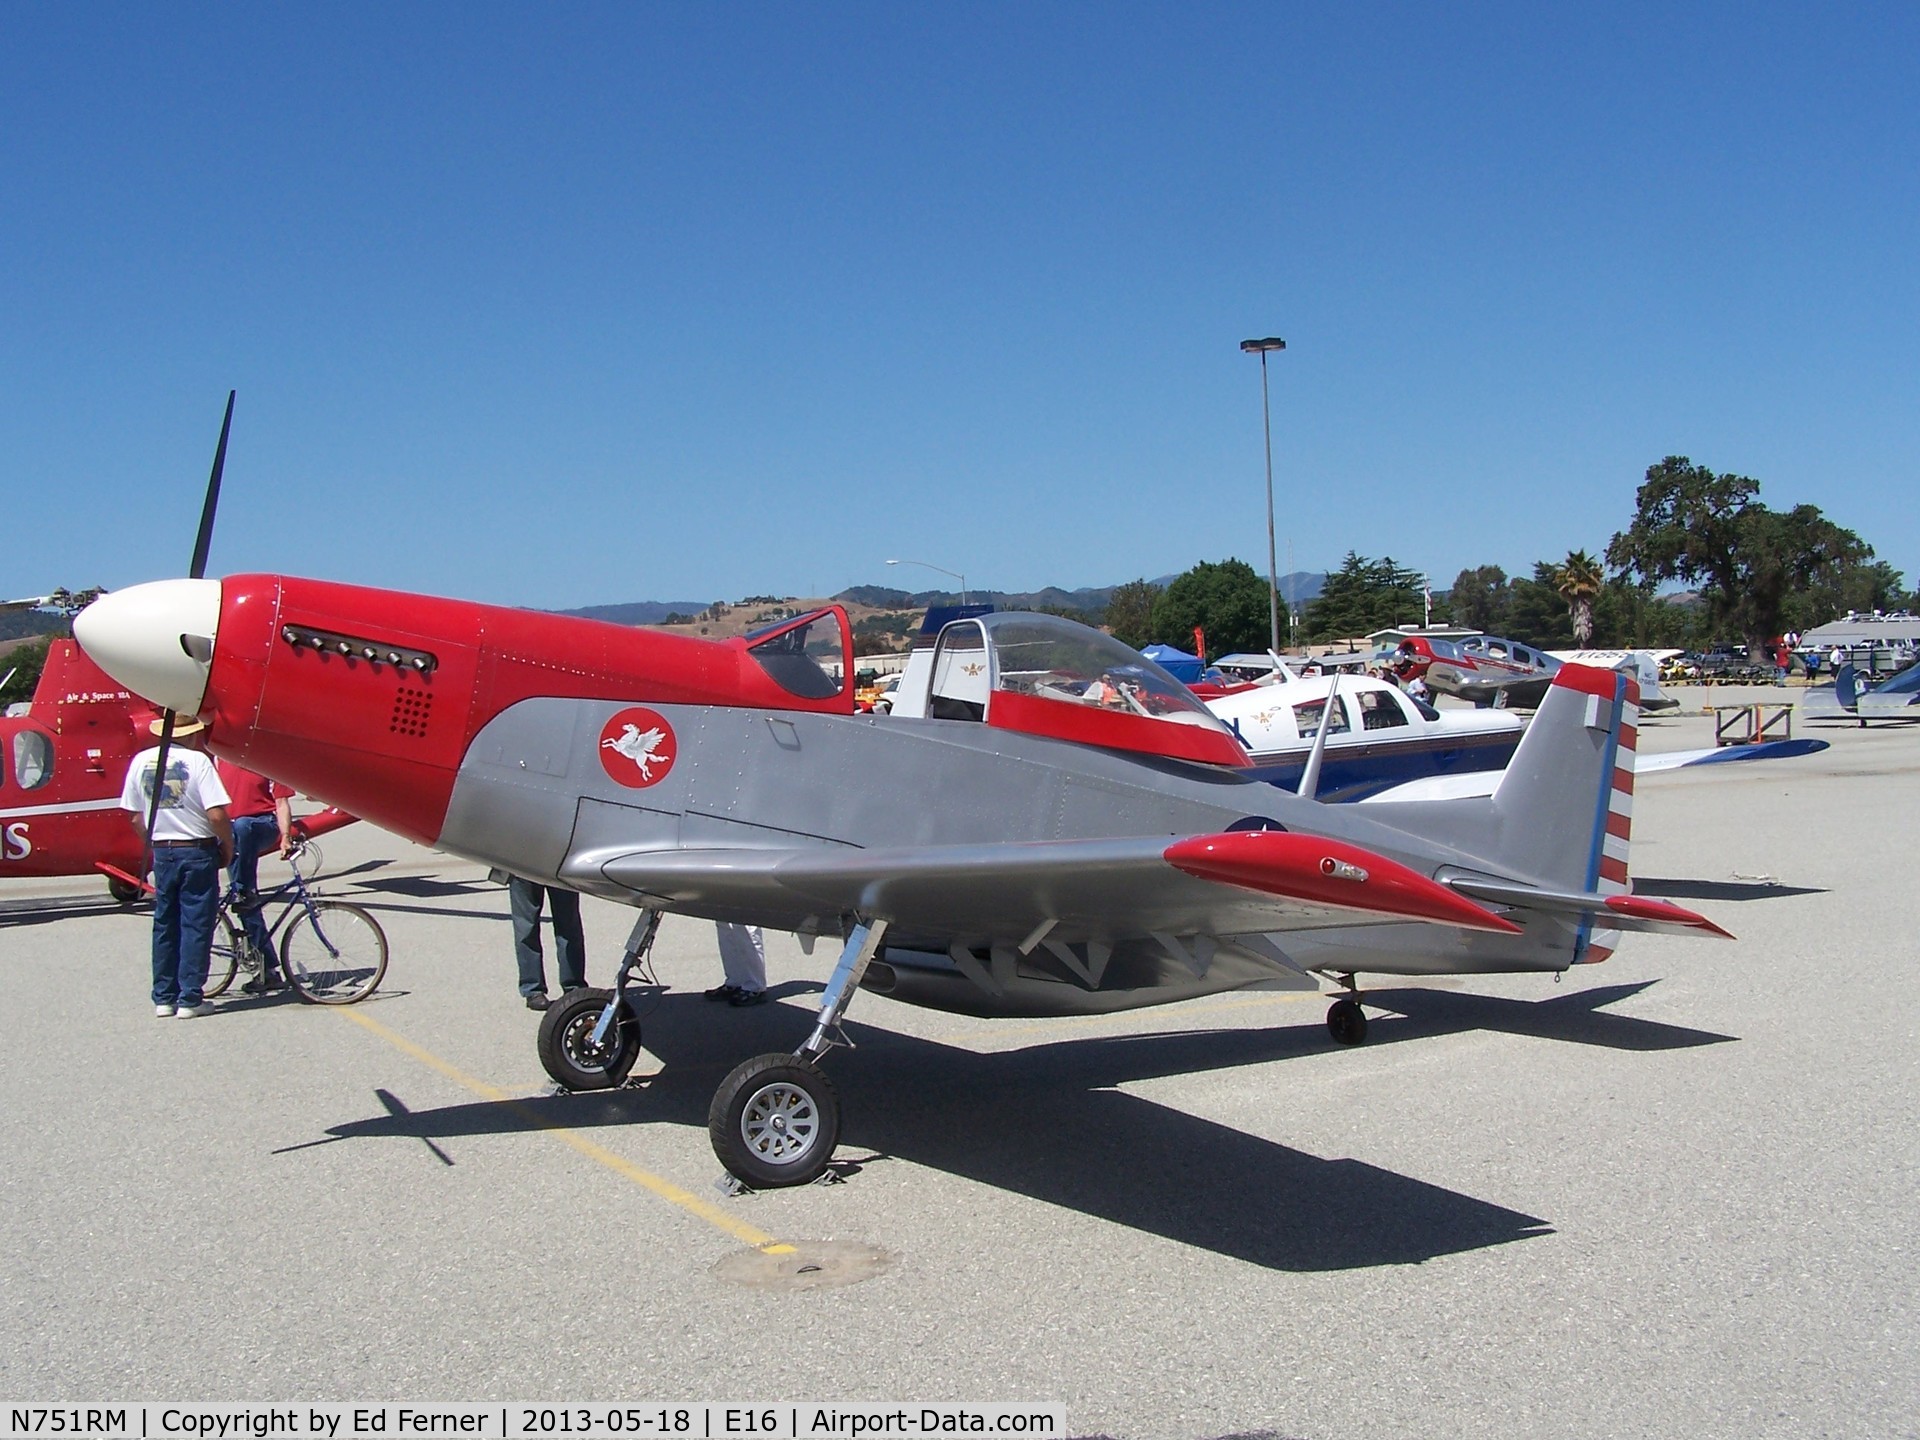 N751RM, Titan T-51 Mustang C/N MLS08912SOHK0137, Appeared at the San Martin Airport Fly In on May 18, 2013.